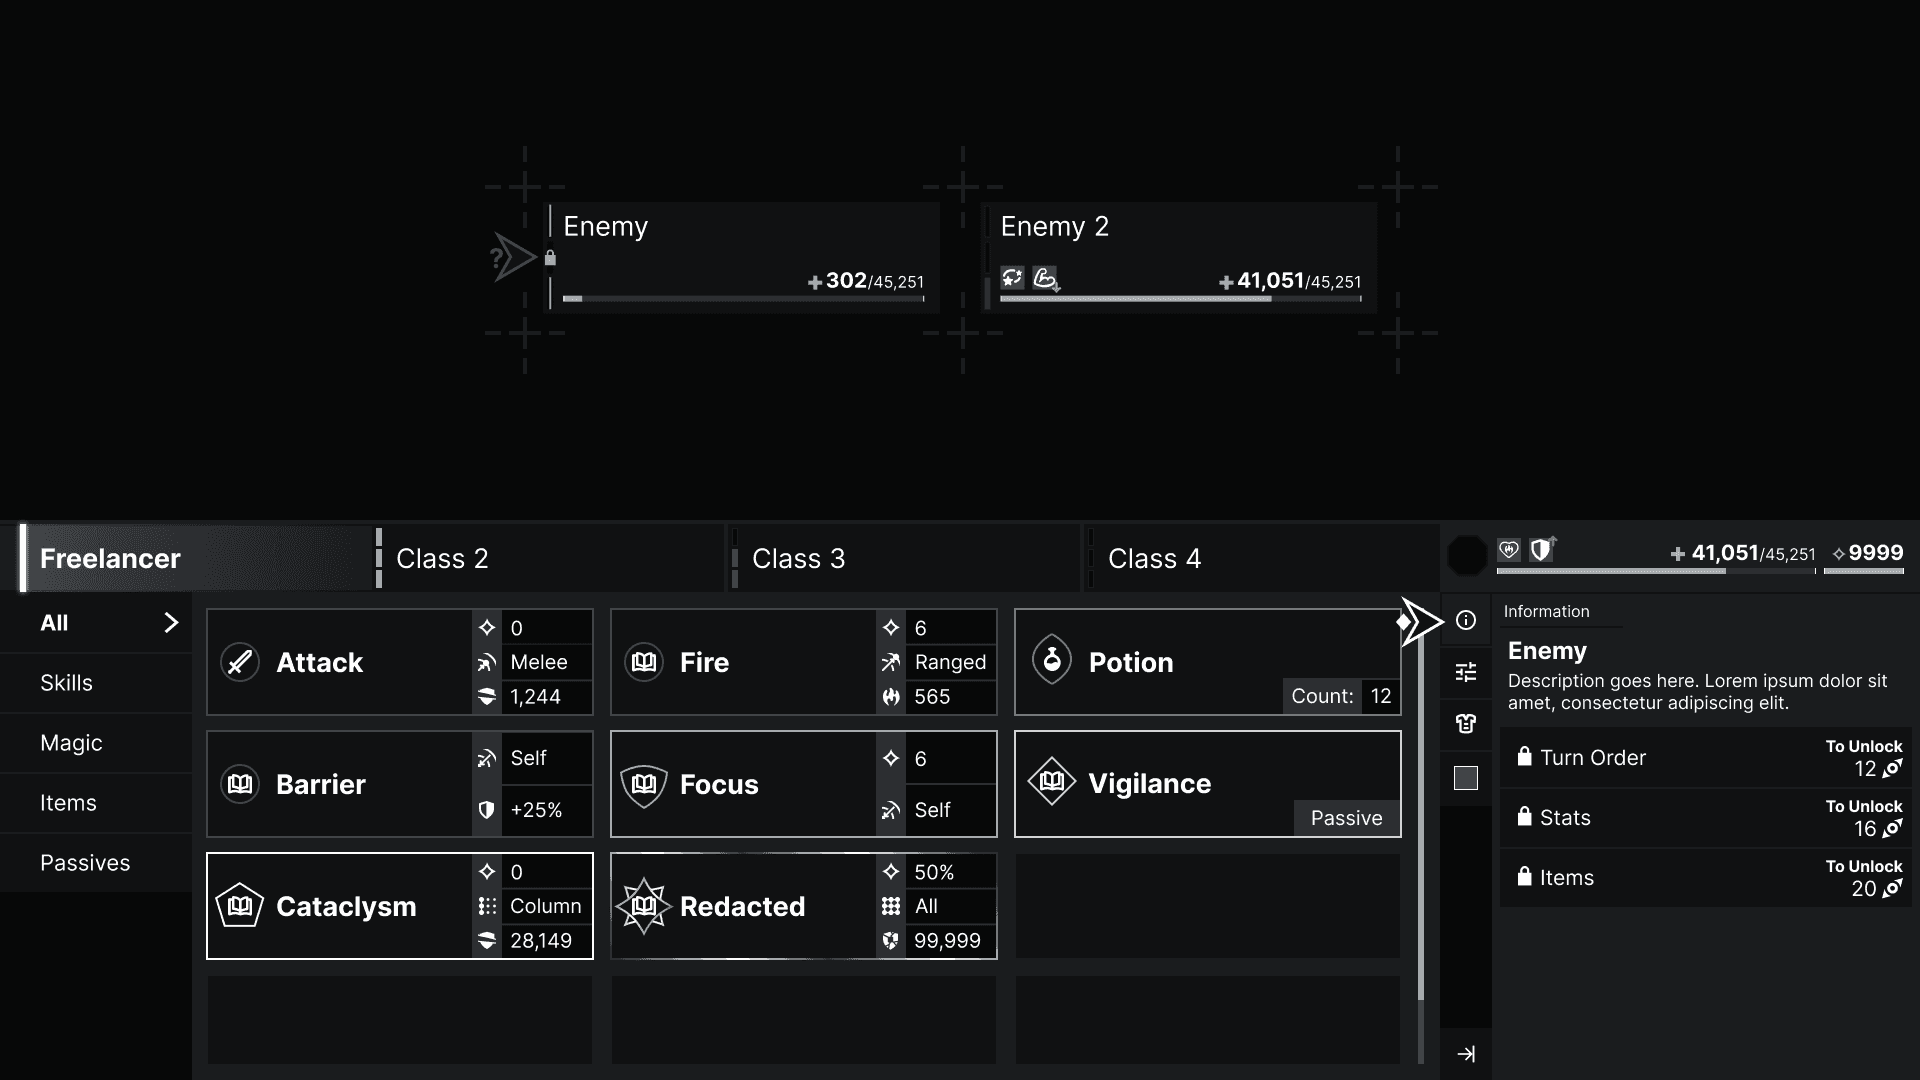 The new mock up previously shared in the intro of this article. It depicts the second frame from Fig. 3. It's presented in grayscale and depicts a variety of enemies, player abilities, and player stats in UI elements that would often be seen in an RPG.